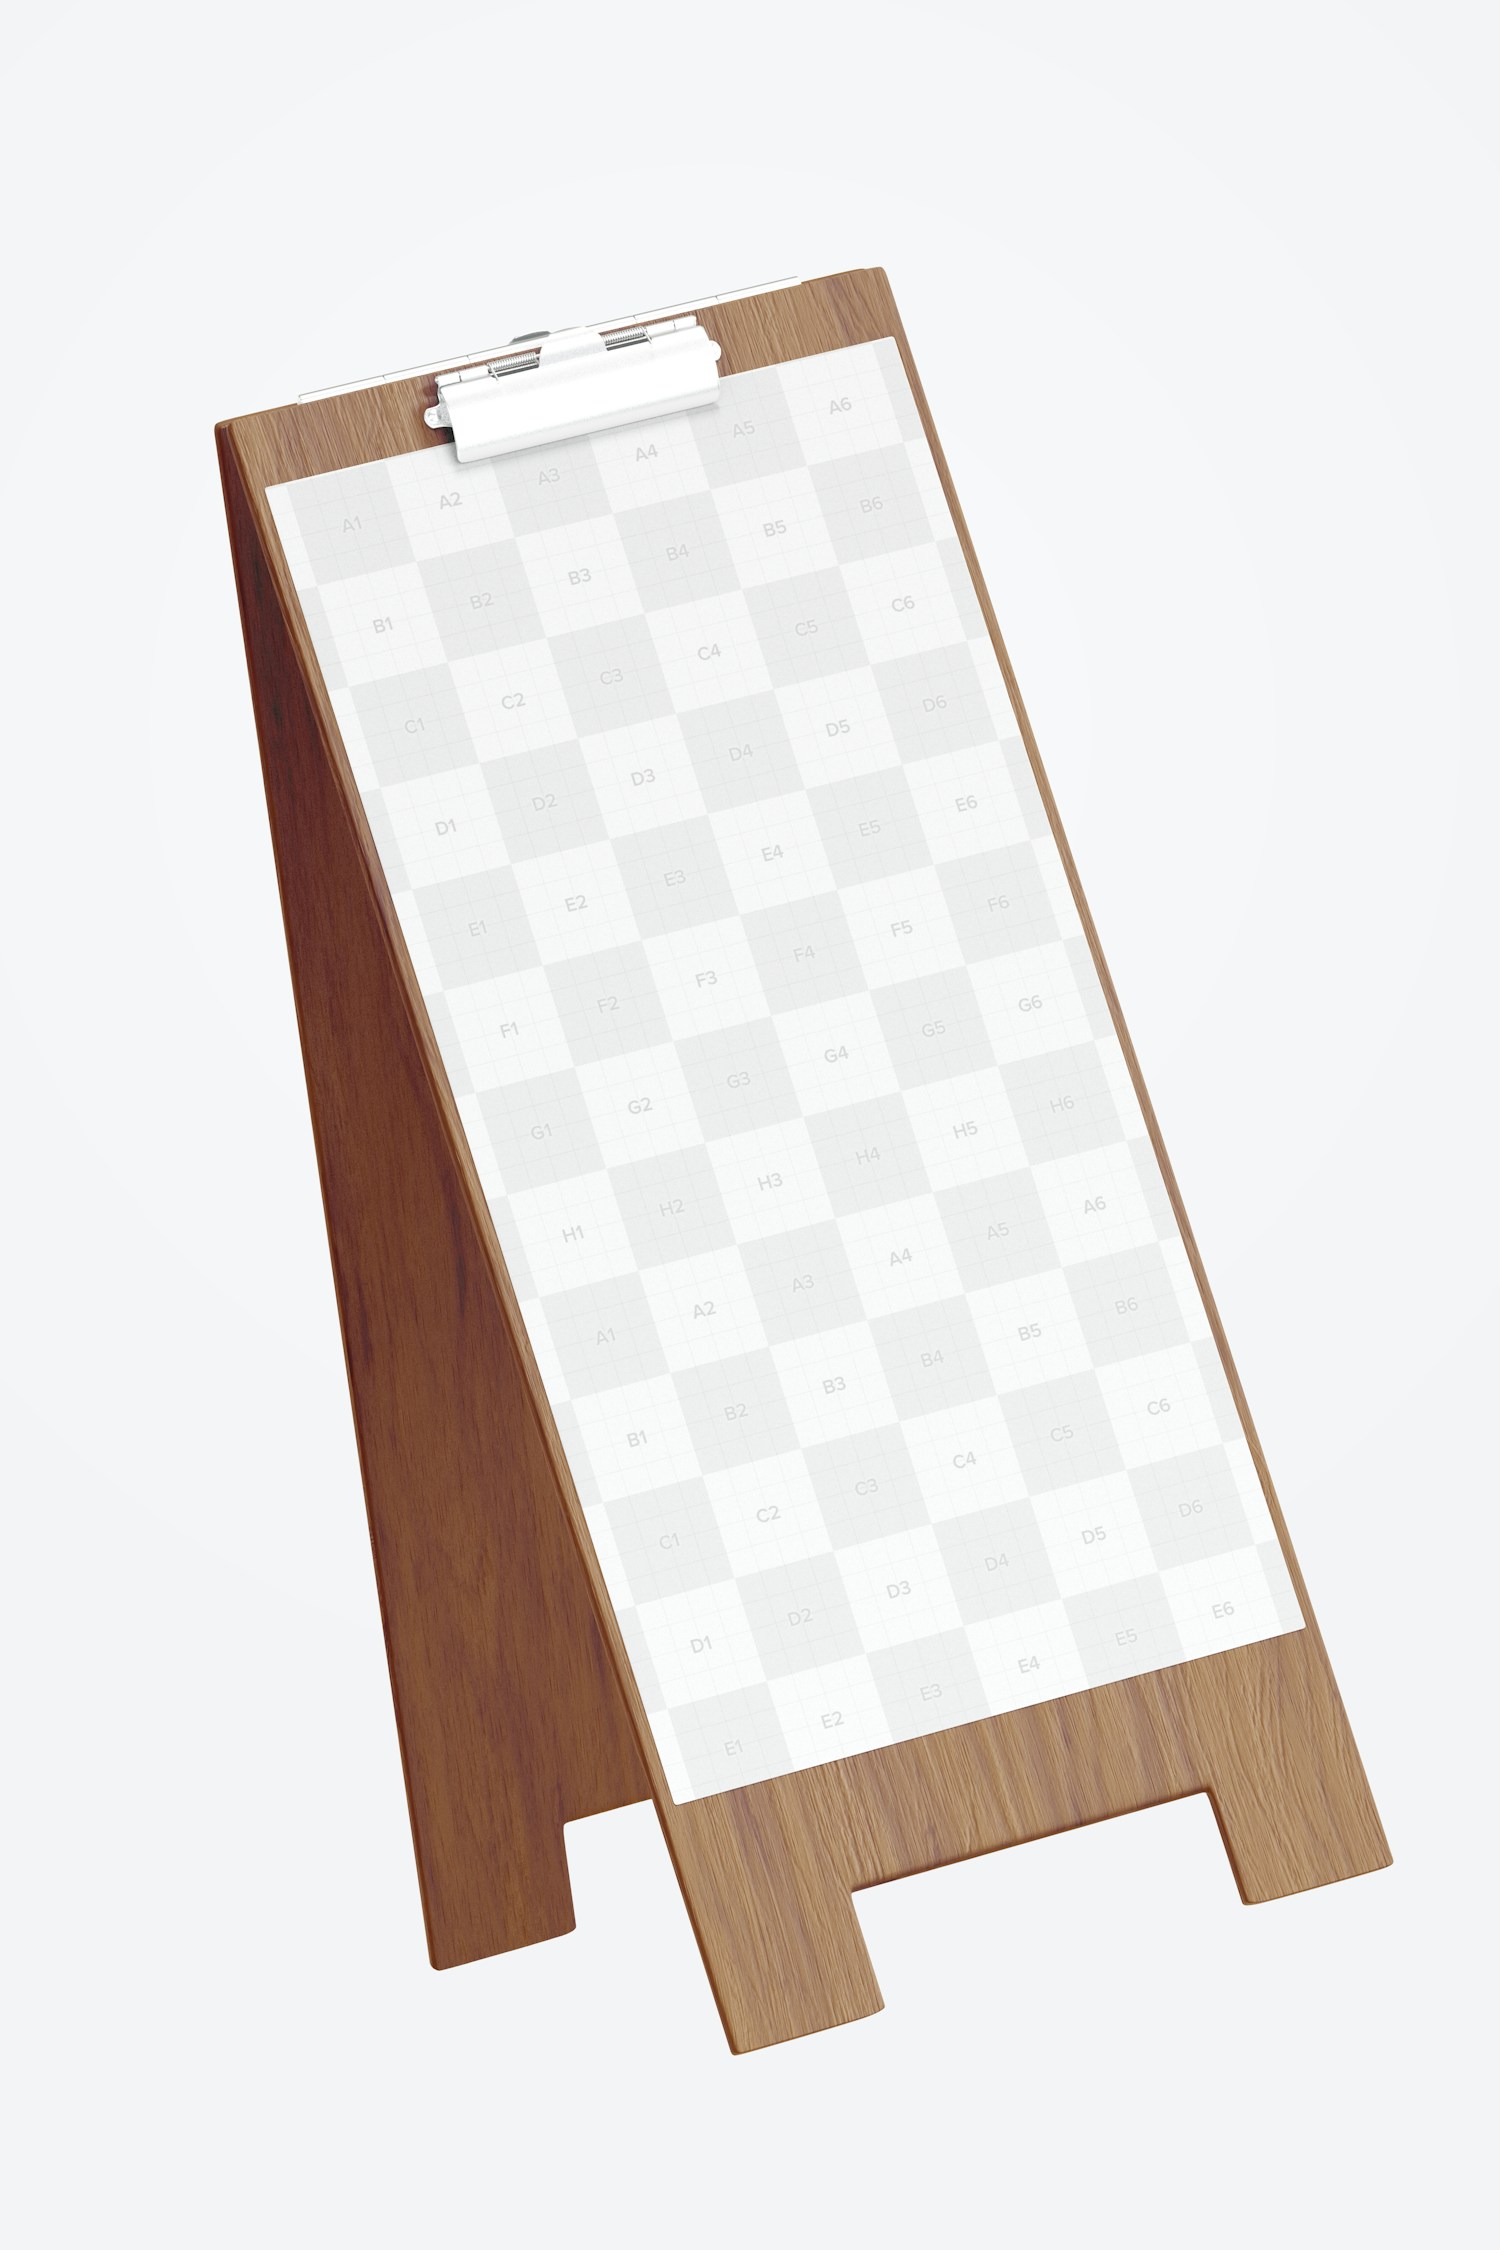 Wood Table Tent with Clip Mockup, Floating